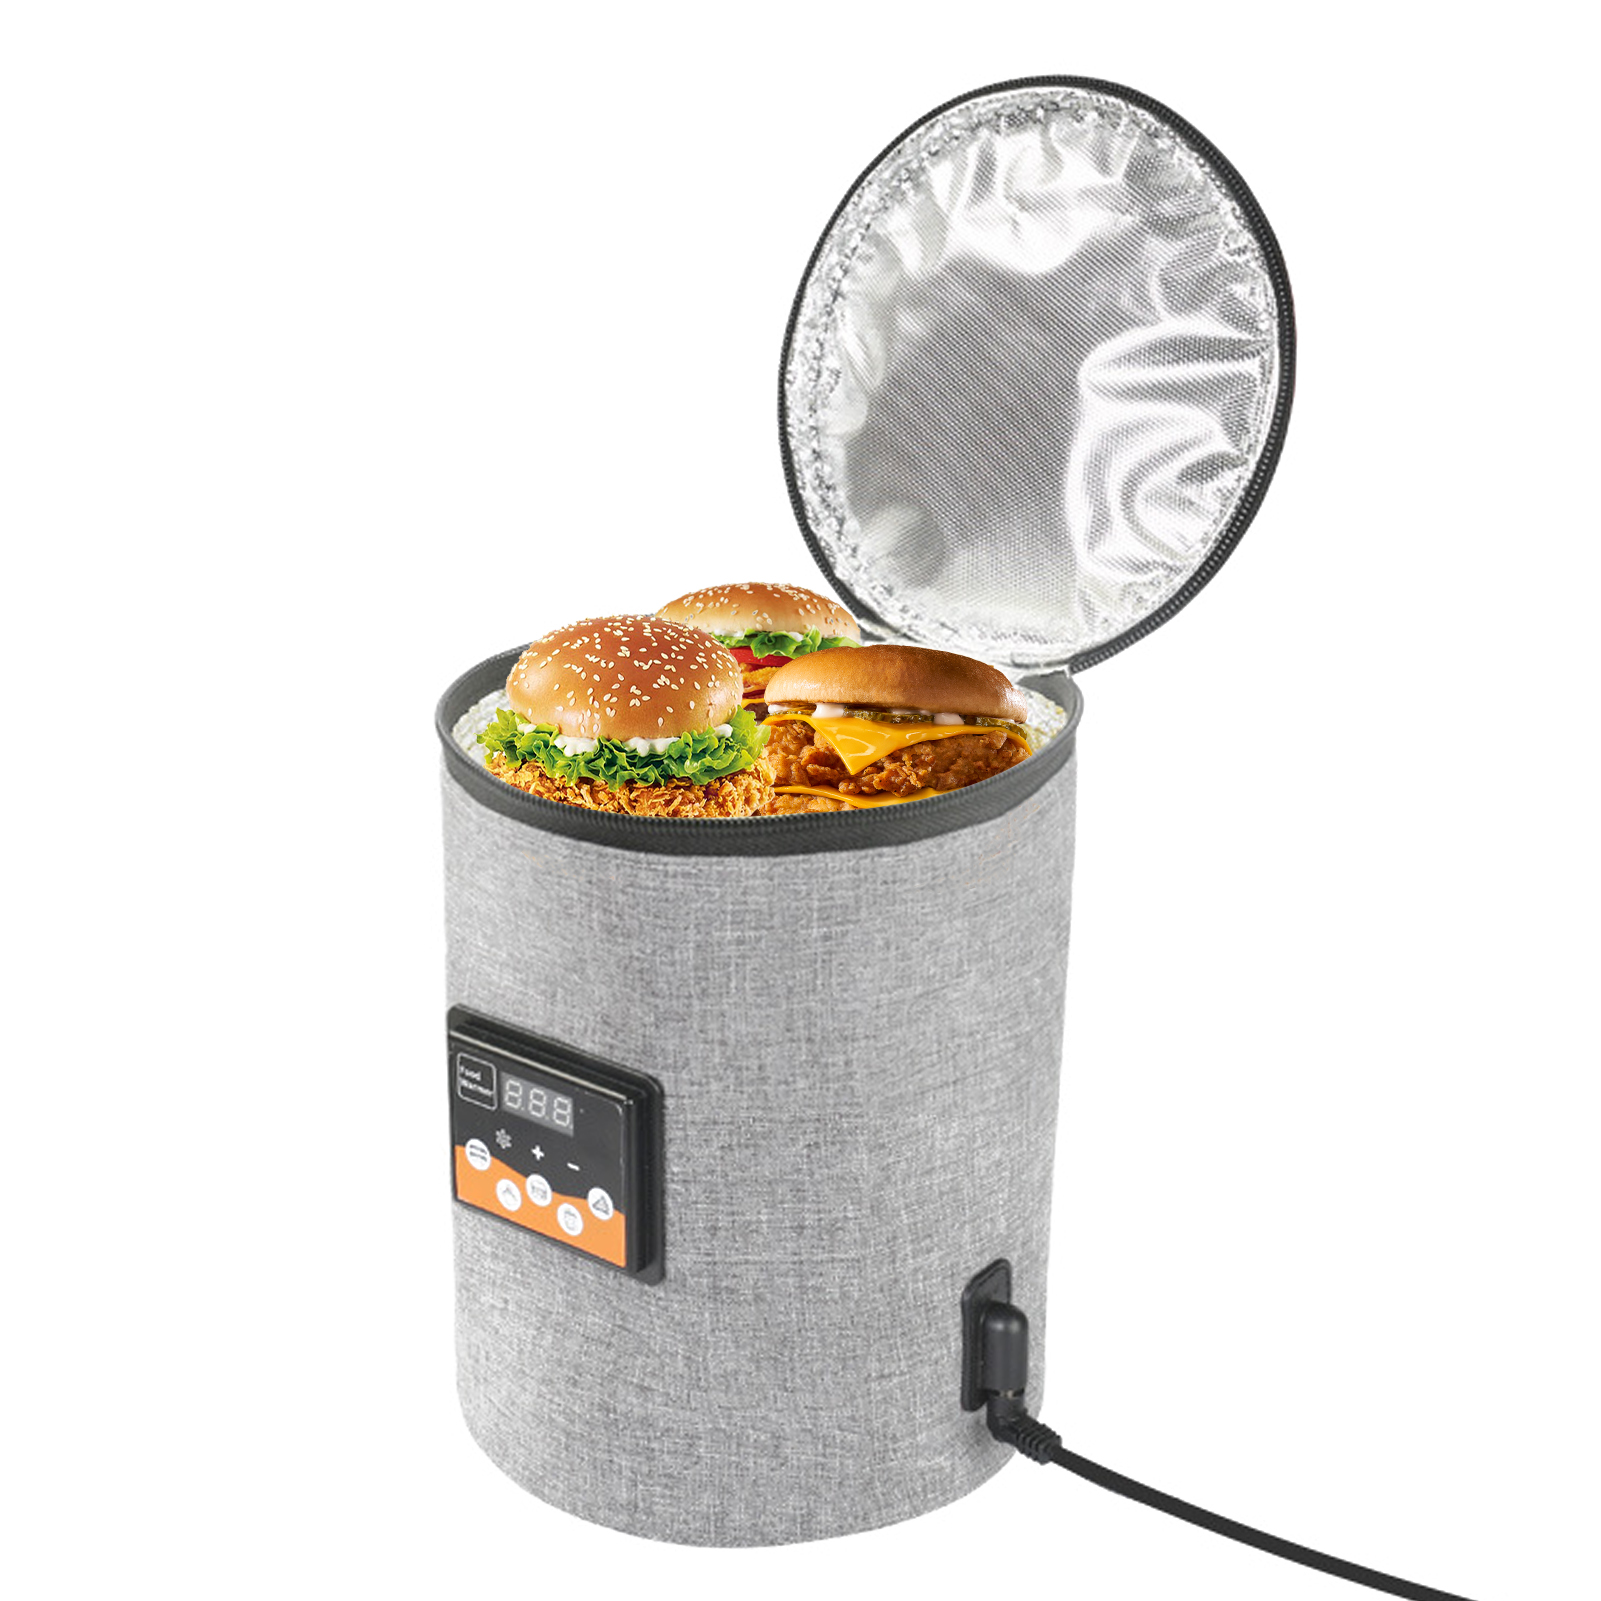 Portable Oven 12V Car Food Warmer Personal Mini Oven with Digital Display Temperature Preset Electric Car Heating Lunch Box for Road Trip Camping Picnic On The Go Office Work